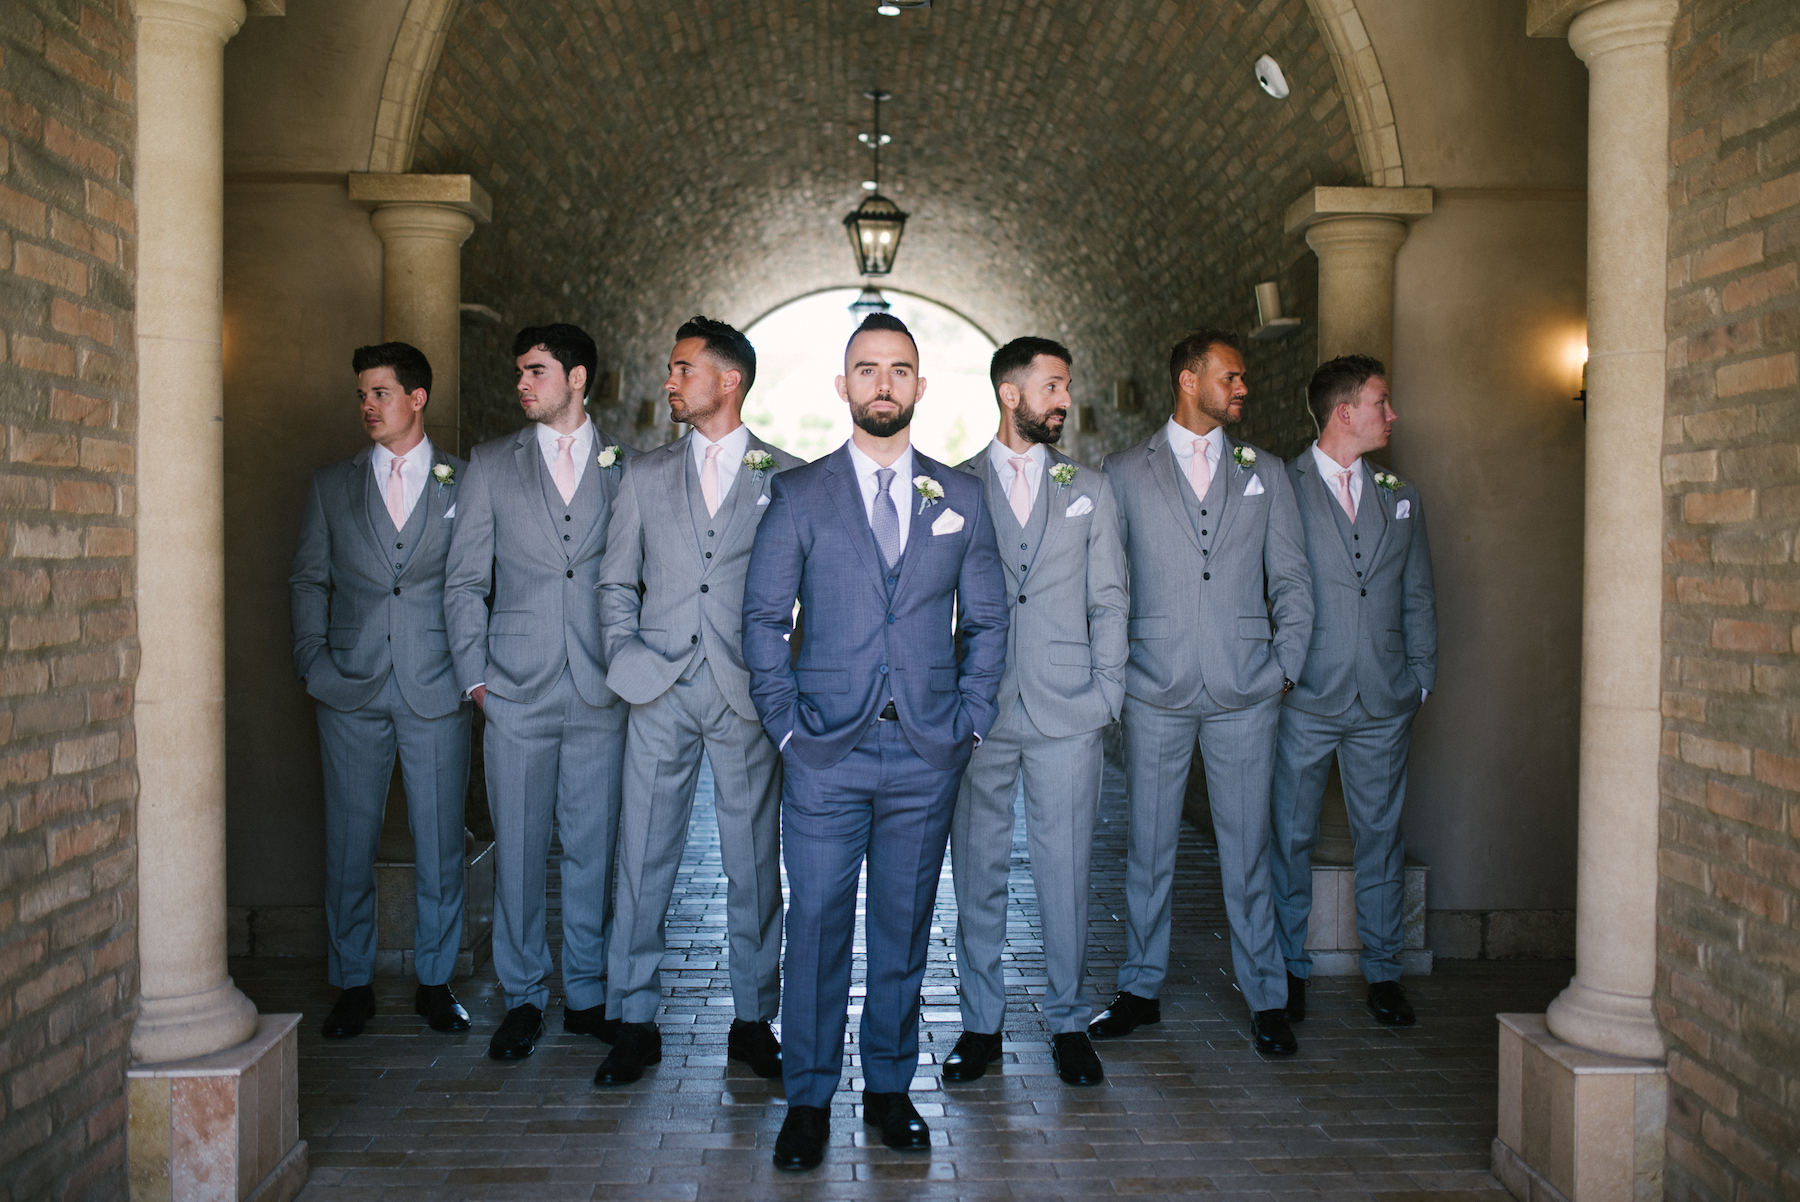 Groomsmen photo by Yvonne Goll Photography